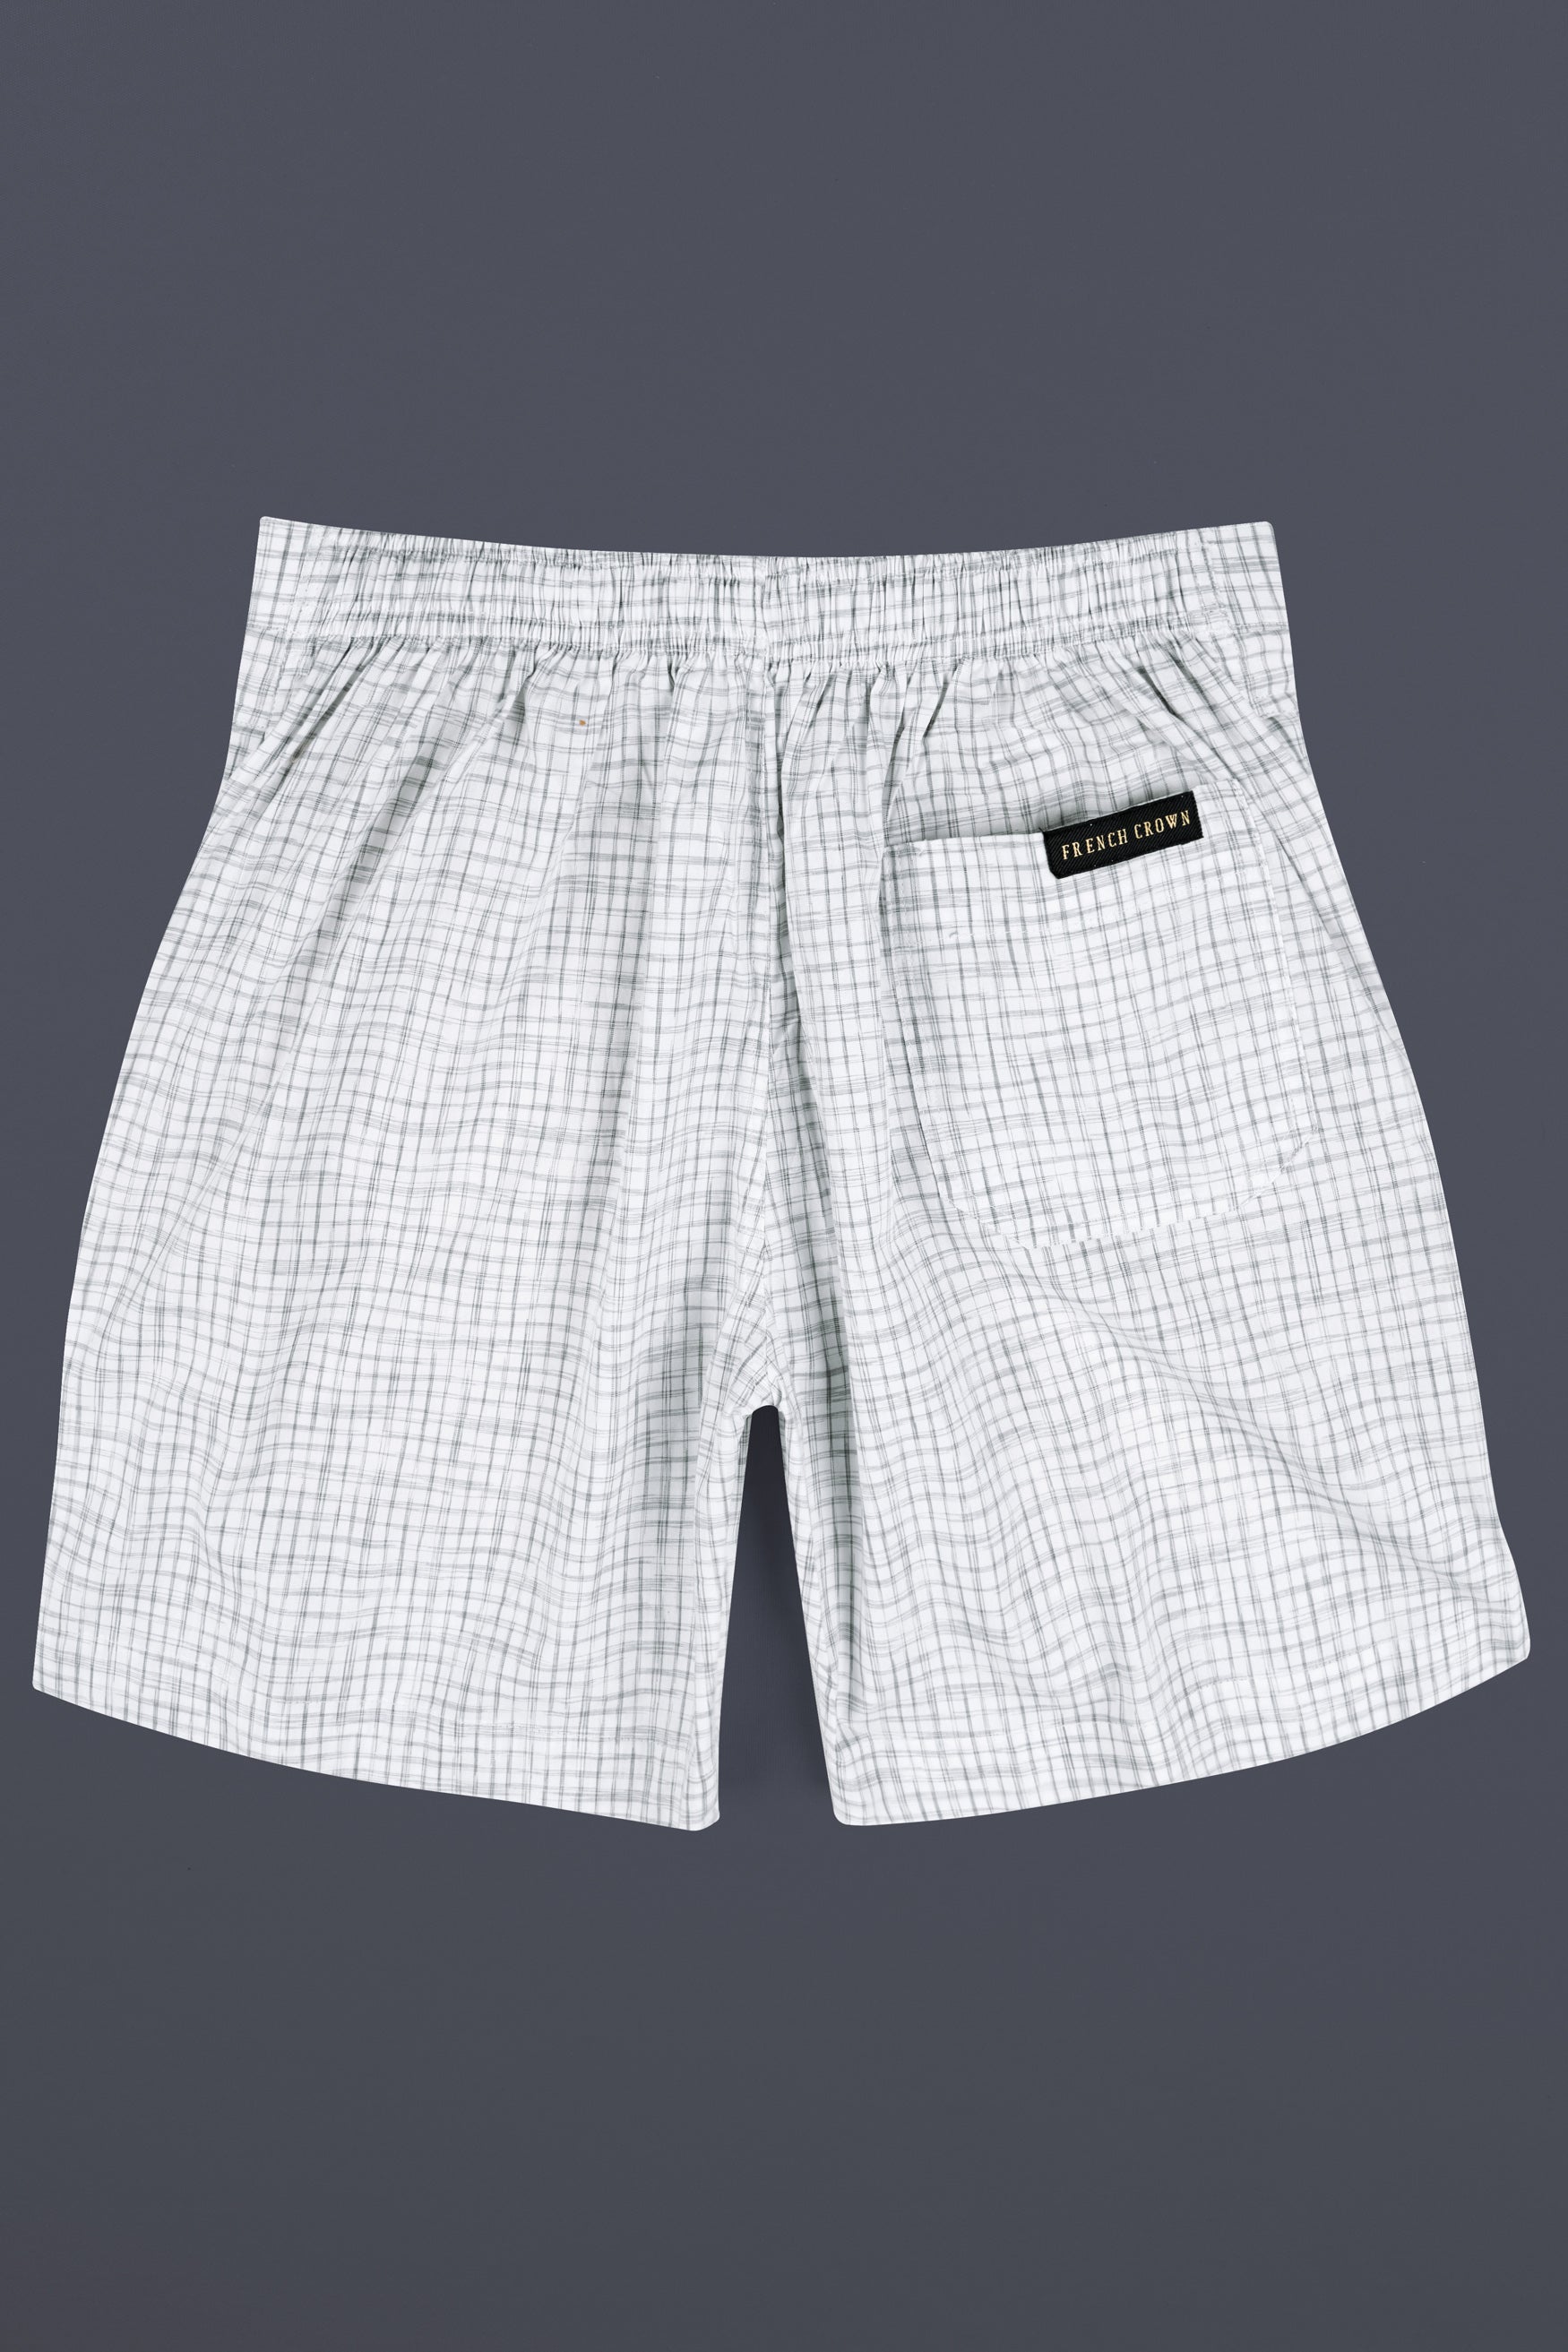 Bright White and Mountain Mist Gray Checkered Premium Cotton Shorts SR397-28, SR397-30, SR397-32, SR397-34, SR397-36, SR397-38, SR397-40, SR397-42, SR397-44